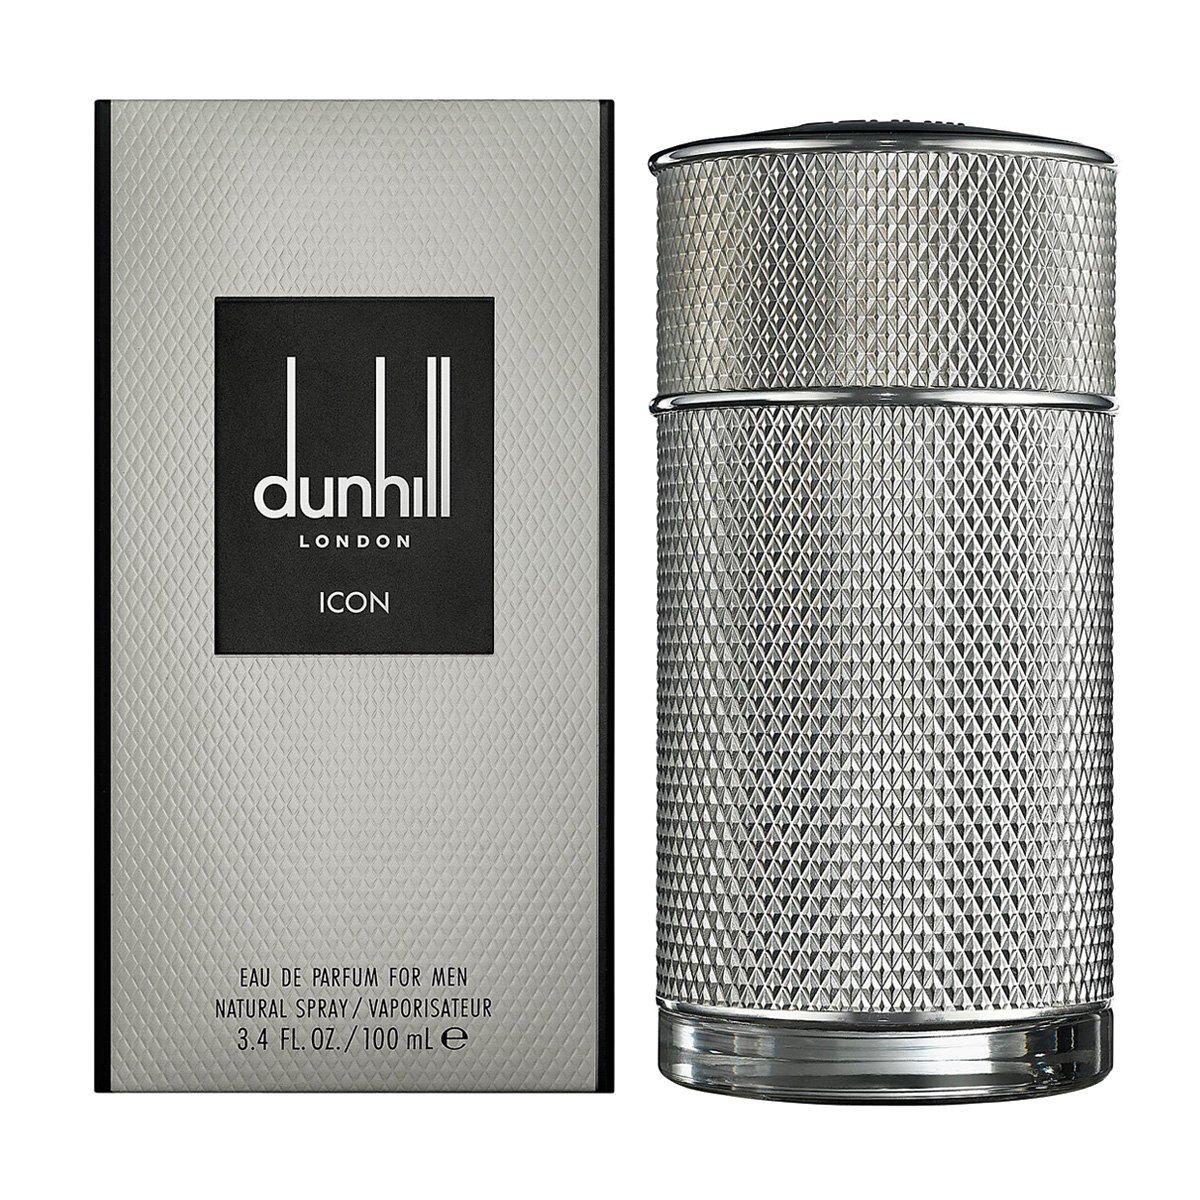 Icon туалетная вода. Духи Alfred Dunhill icon. Dunhill icon 100 ml. Мужская туалетная вода Данхилл Айкон.